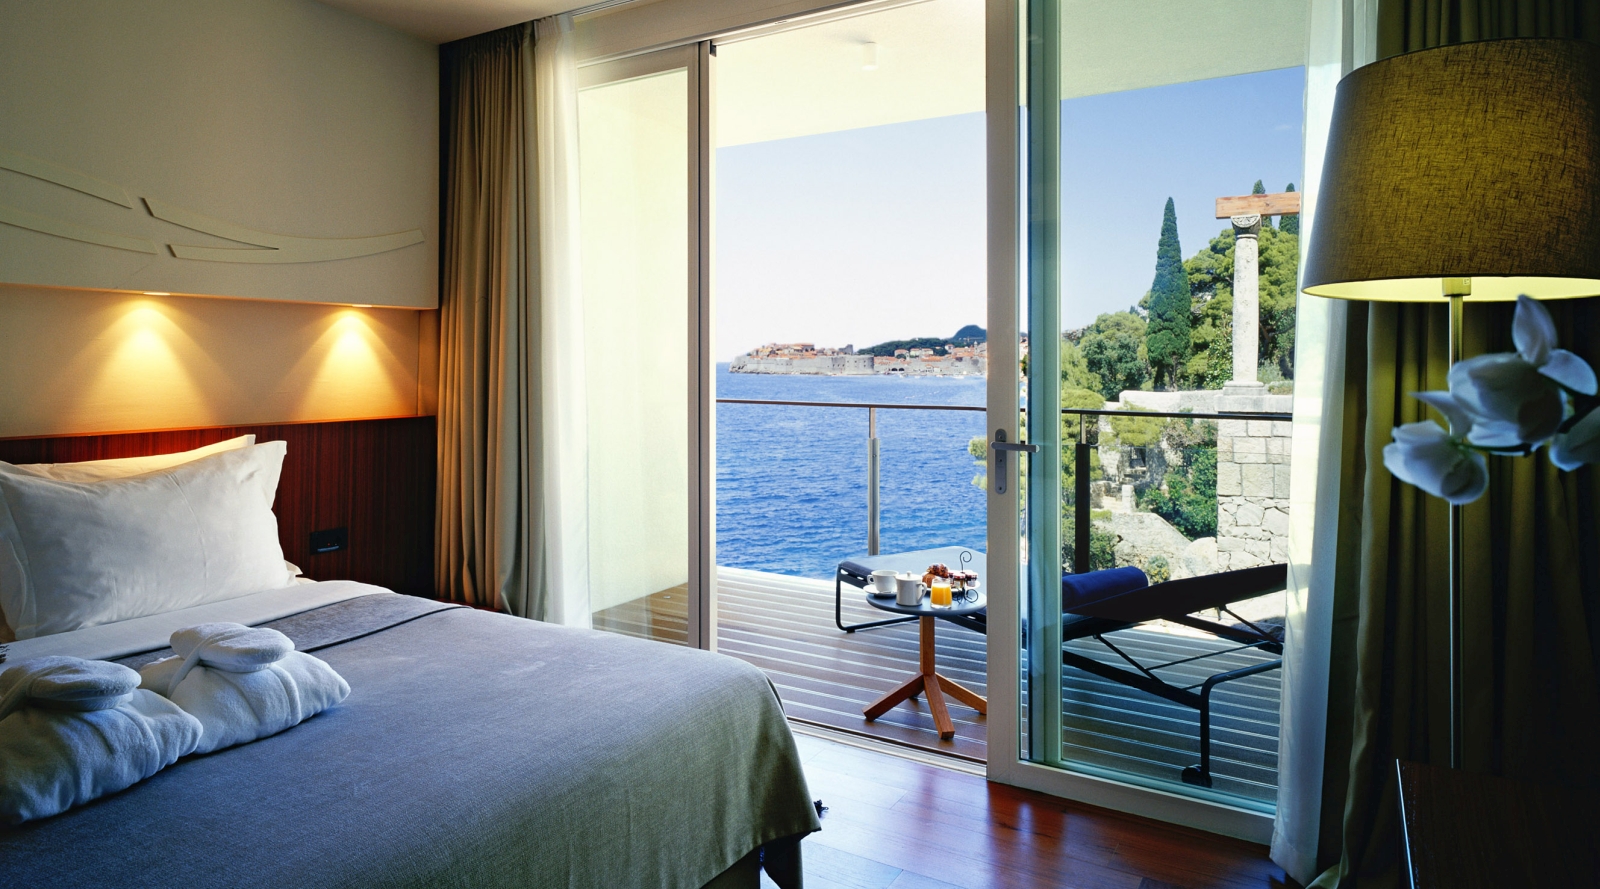 Bedroom of a Loft Suite with private balcony overlooking the Mediterranean Sea and Dubrovnik at luxury hotel Villa Dubrovnik in Croatia